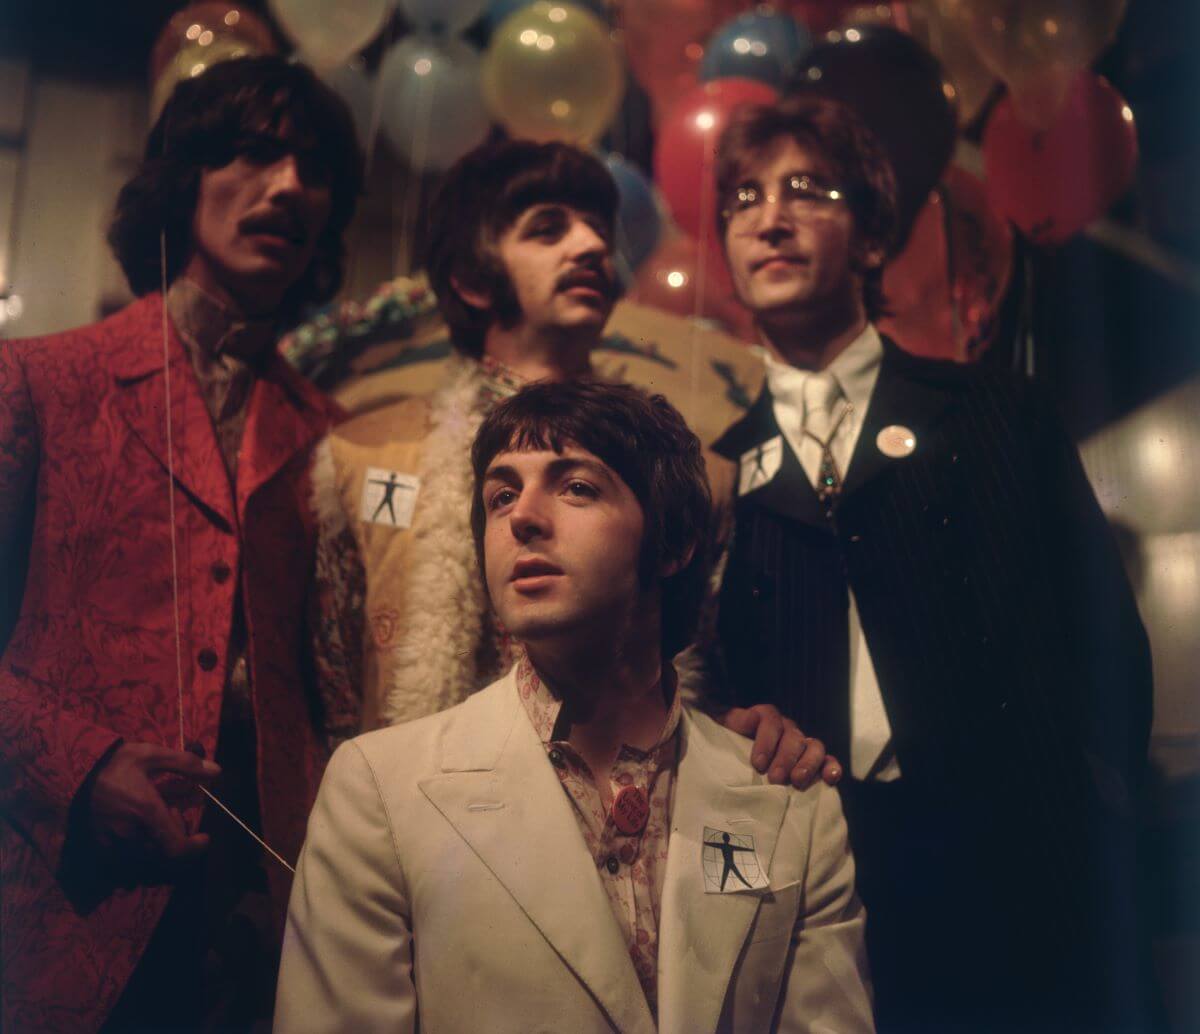 George Harrison, Ringo Starr, and John Lennon stand behind Paul McCartney, who sits. There are balloons behind them.